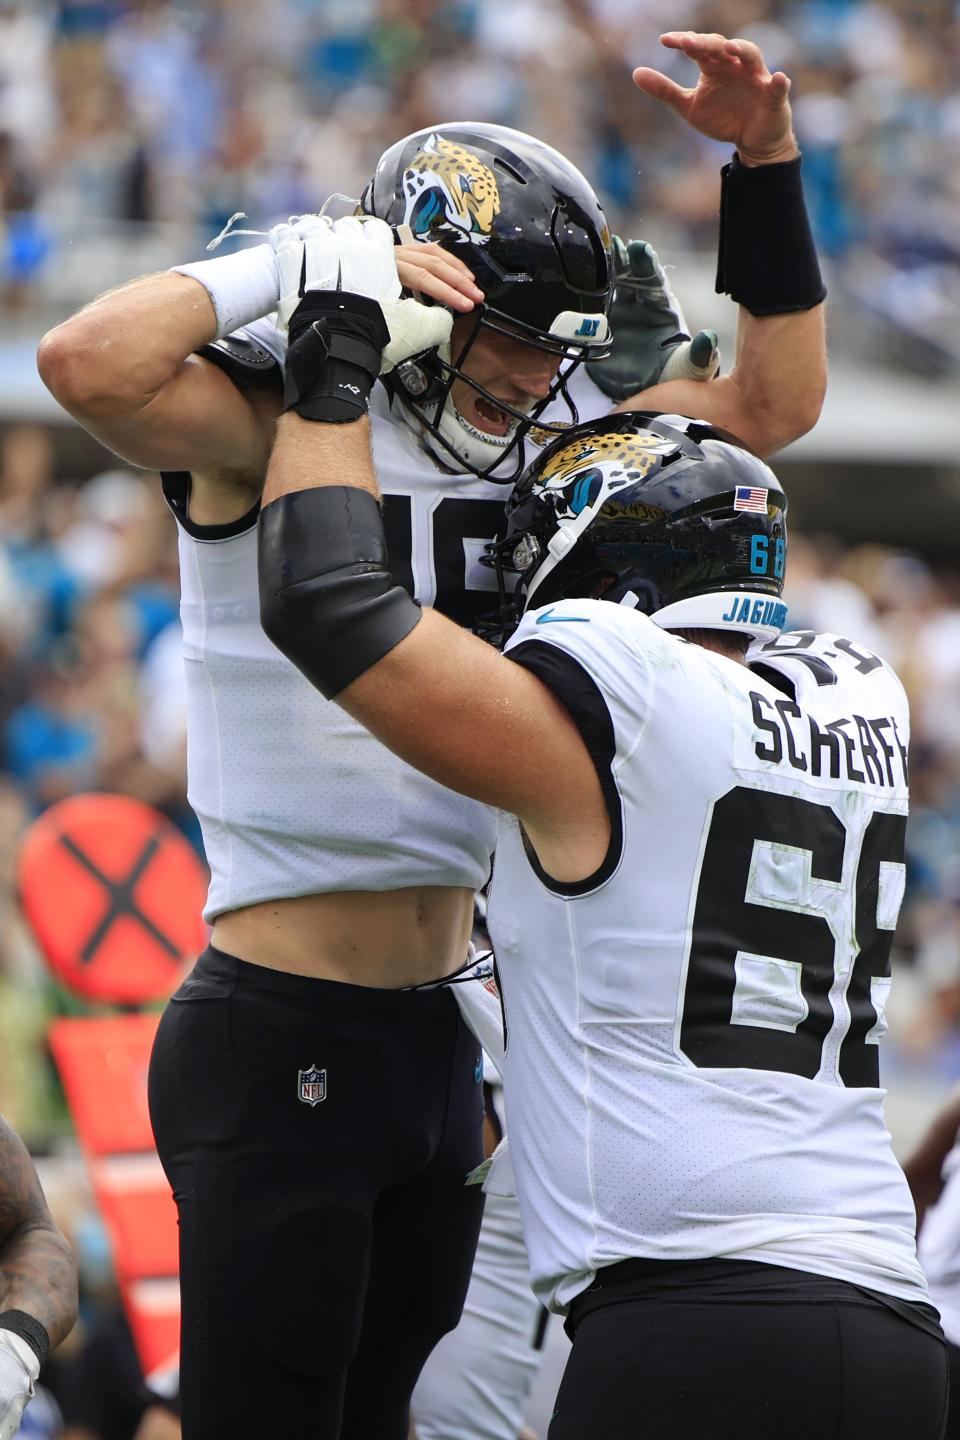 Jacksonville Jaguars quarterback Trevor Lawrence (16) celebrates his touchdown pass with teammate guard Brandon Scherff (68) during the third quarter Sunday, Sept. 18, 2022 at TIAA Bank Field in Jacksonville. The Jacksonville Jaguars blanked the Indianapolis Colts 24-0. [Corey Perrine/Florida Times-Union]